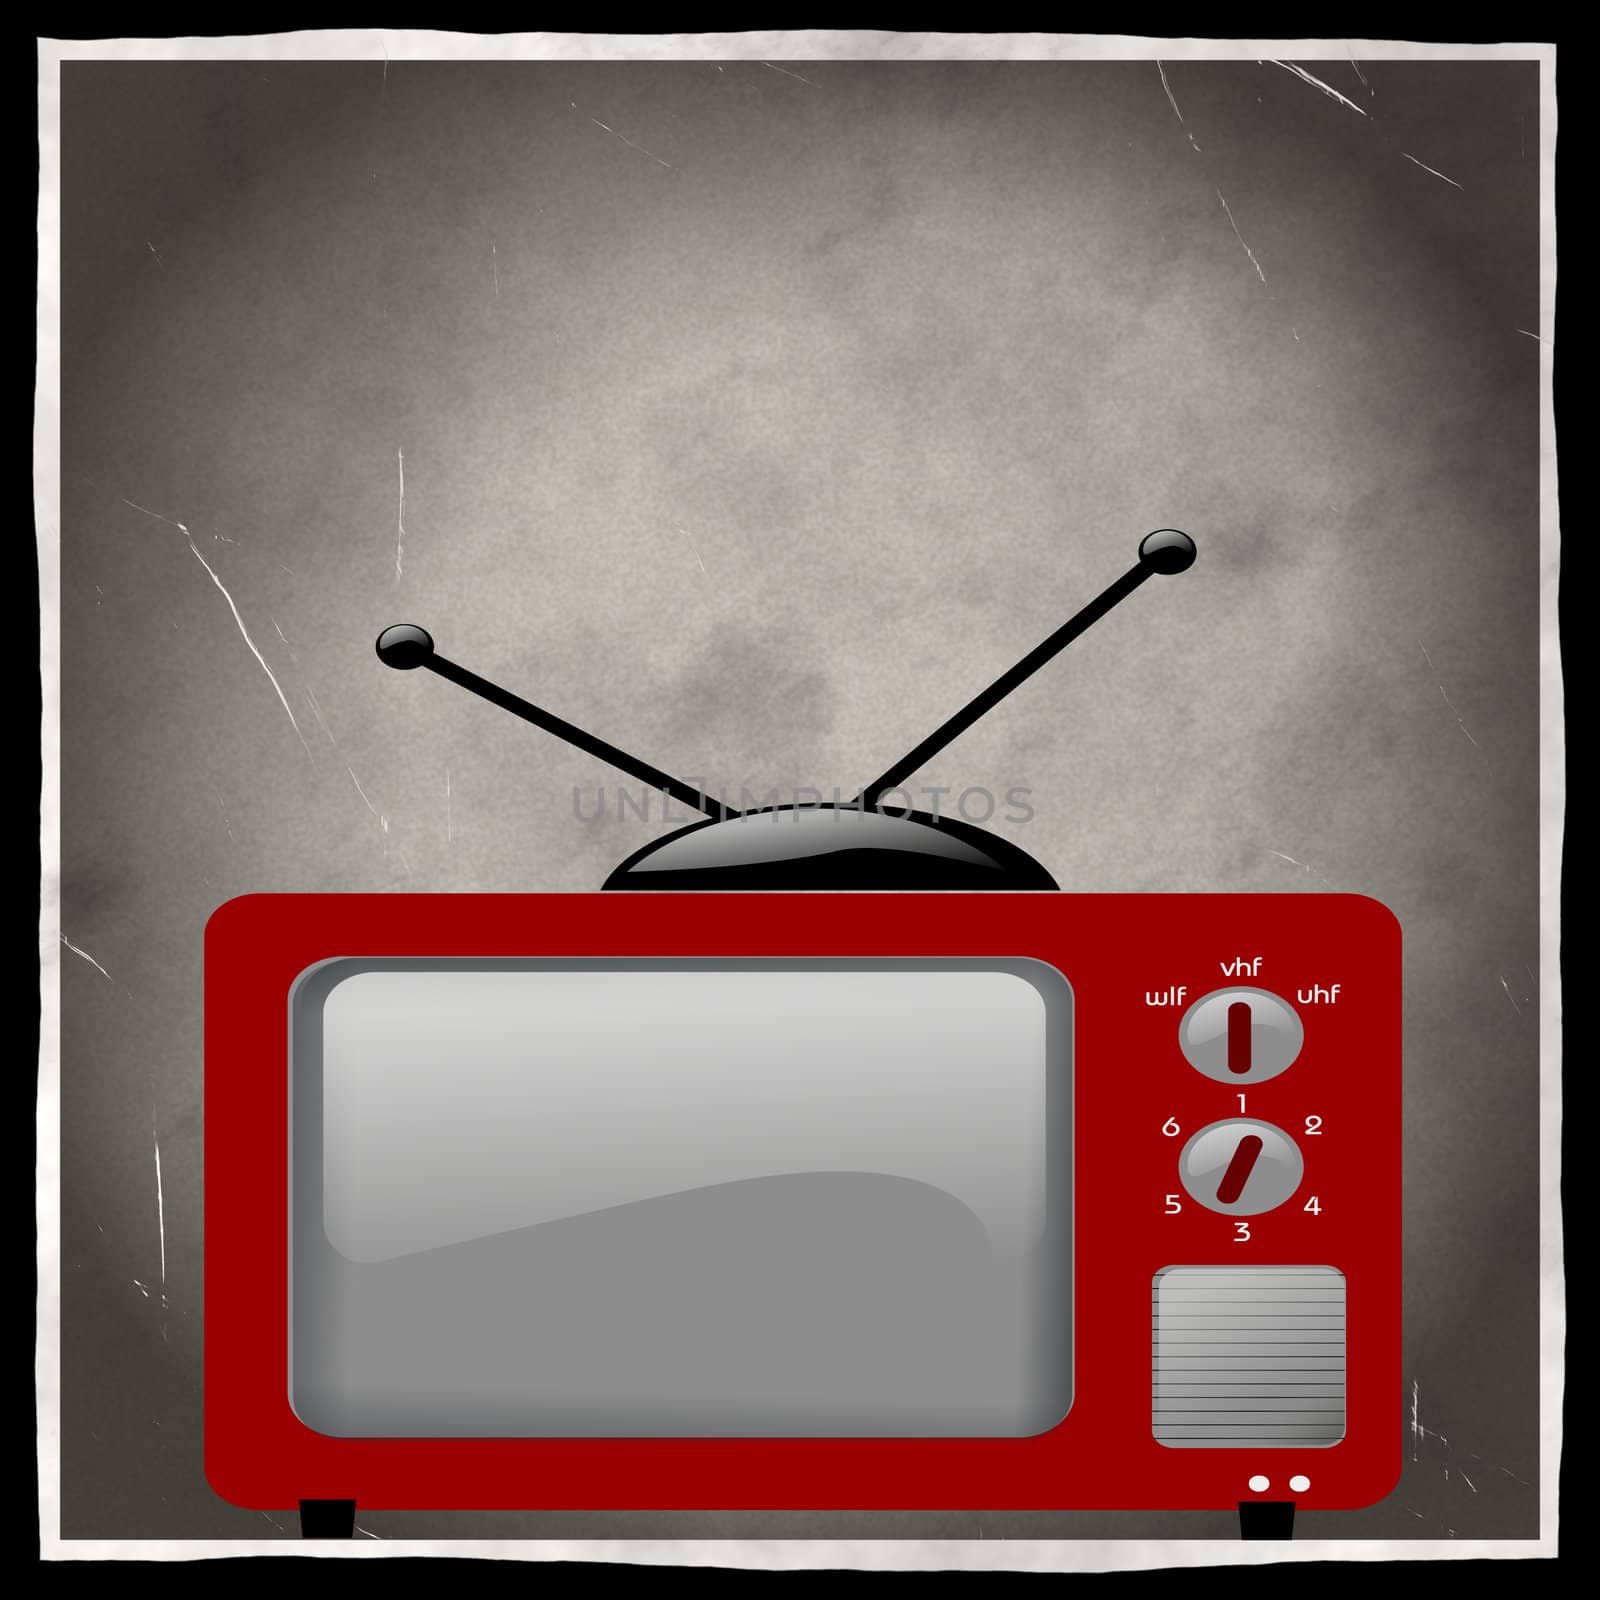 red television on black and white photo grungy background